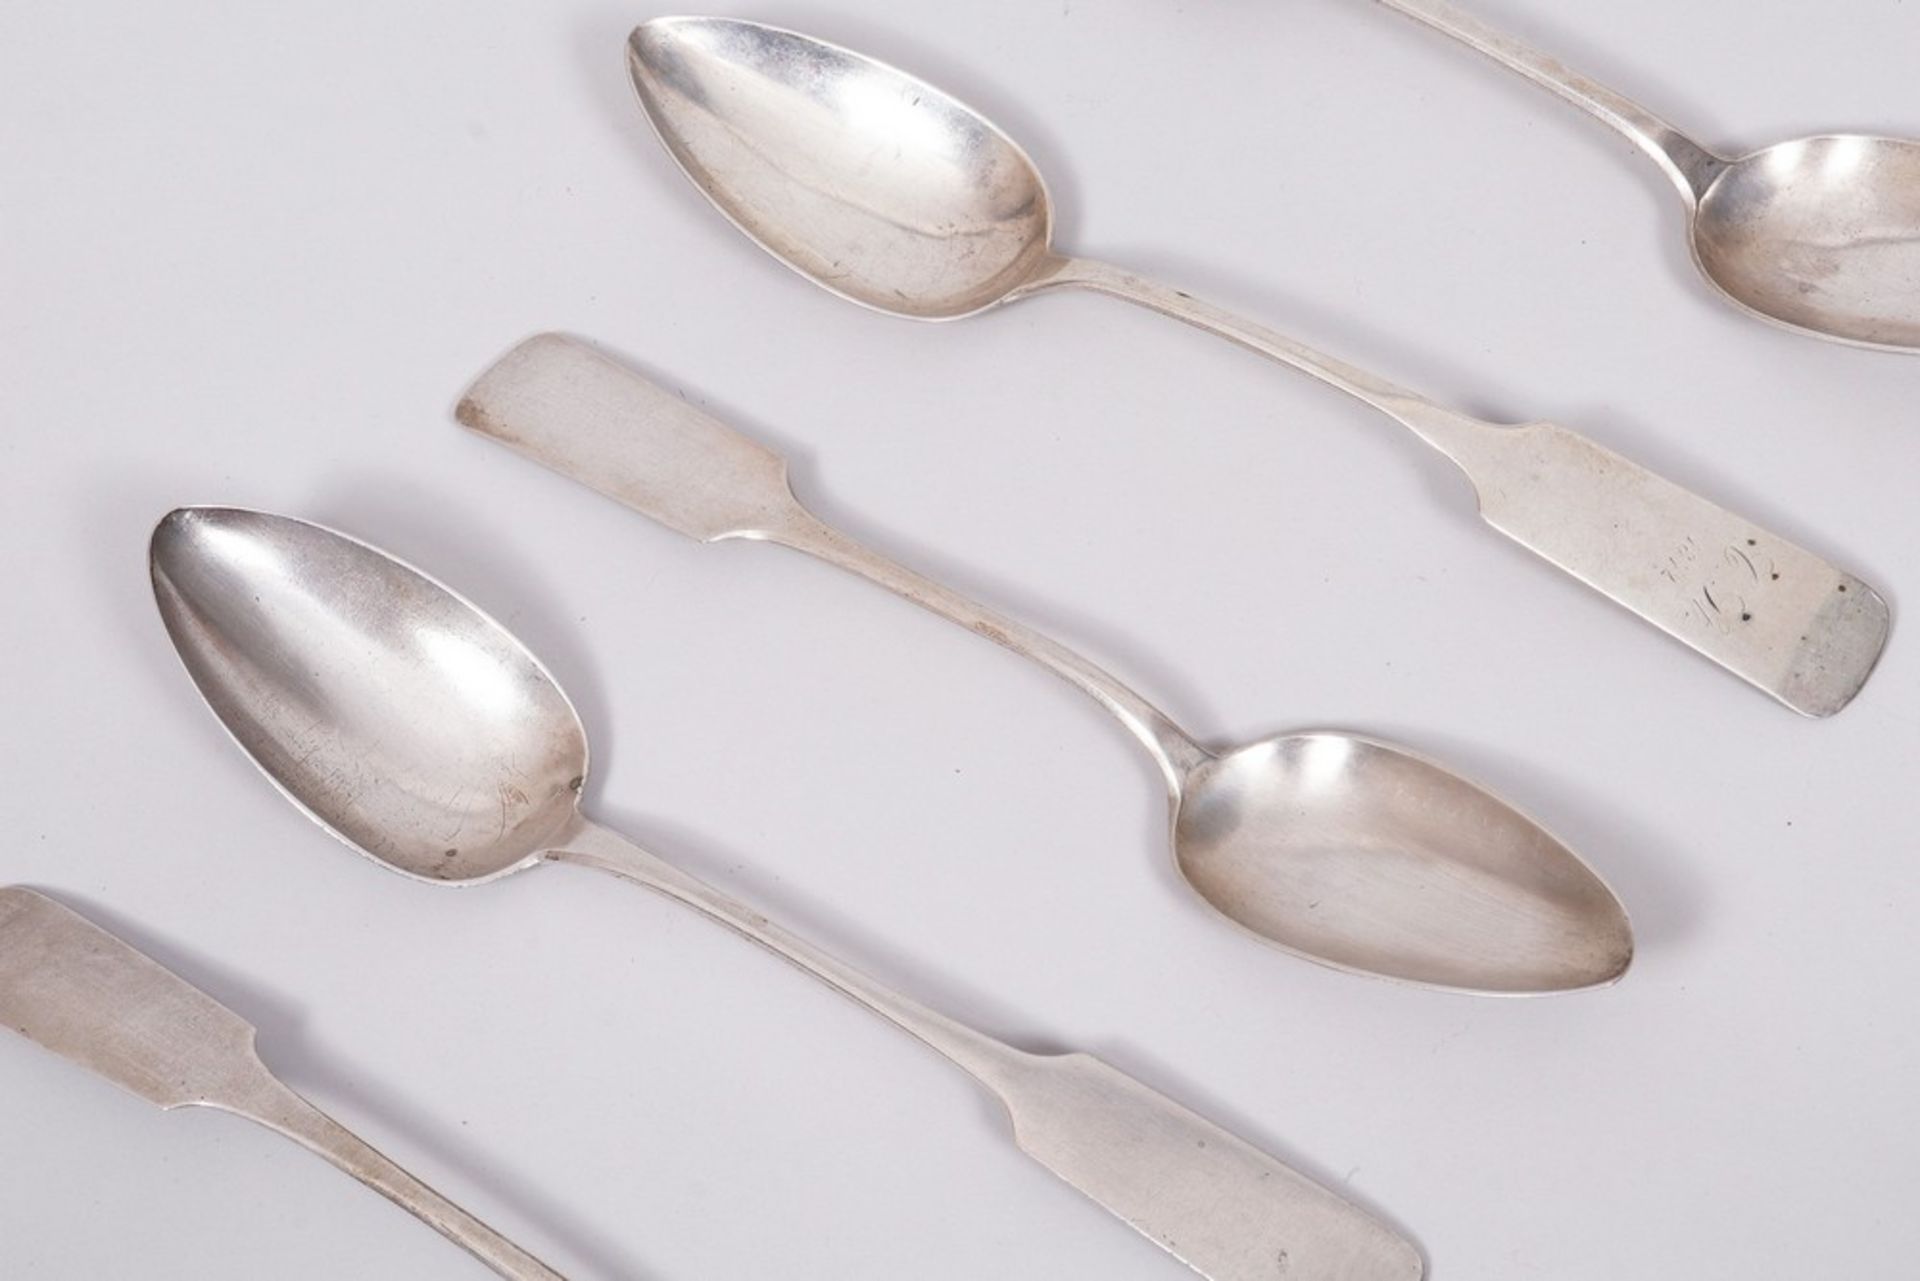 5 dining spoons, 750/800 silver, Hermann Georg Sack, Lübeck, late 19th C. - Image 2 of 3